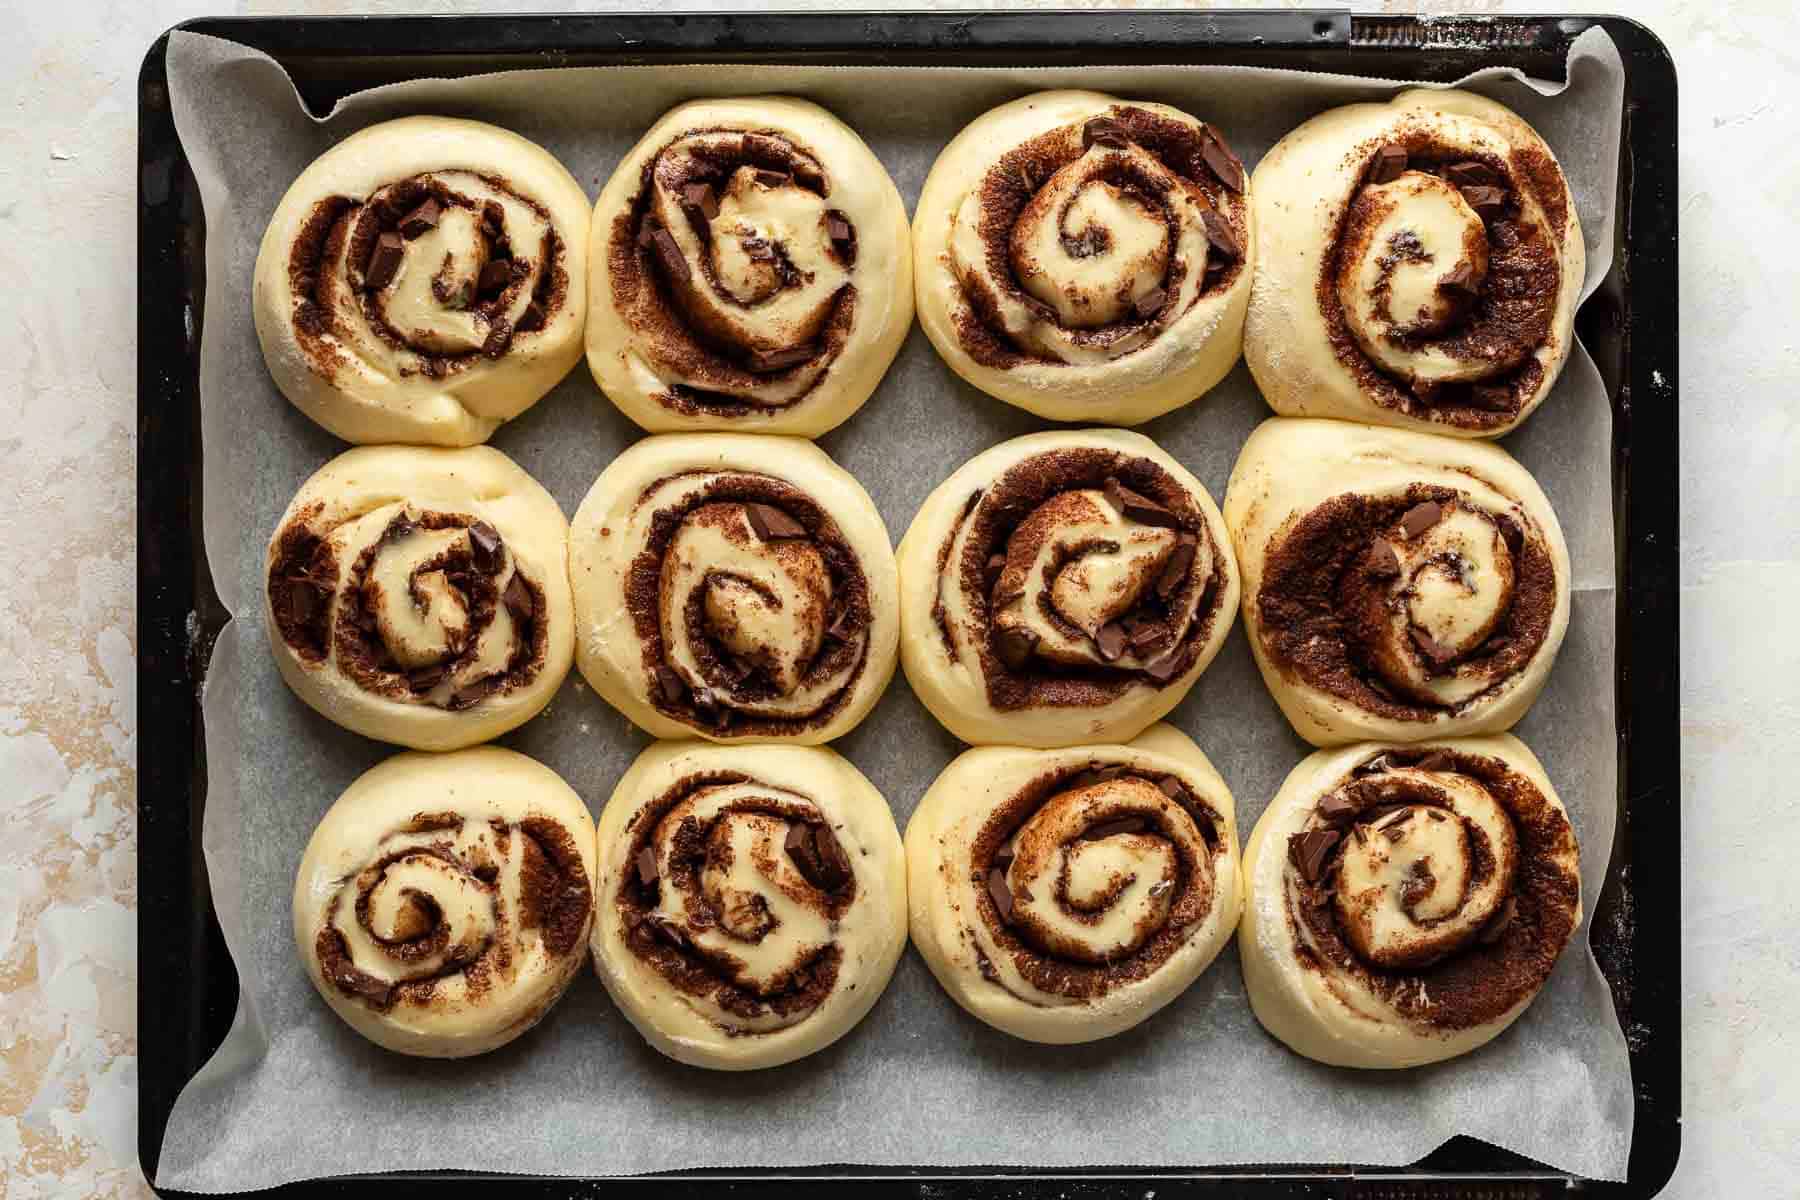 risen chocolate rolls on a baking pan ready to be baked